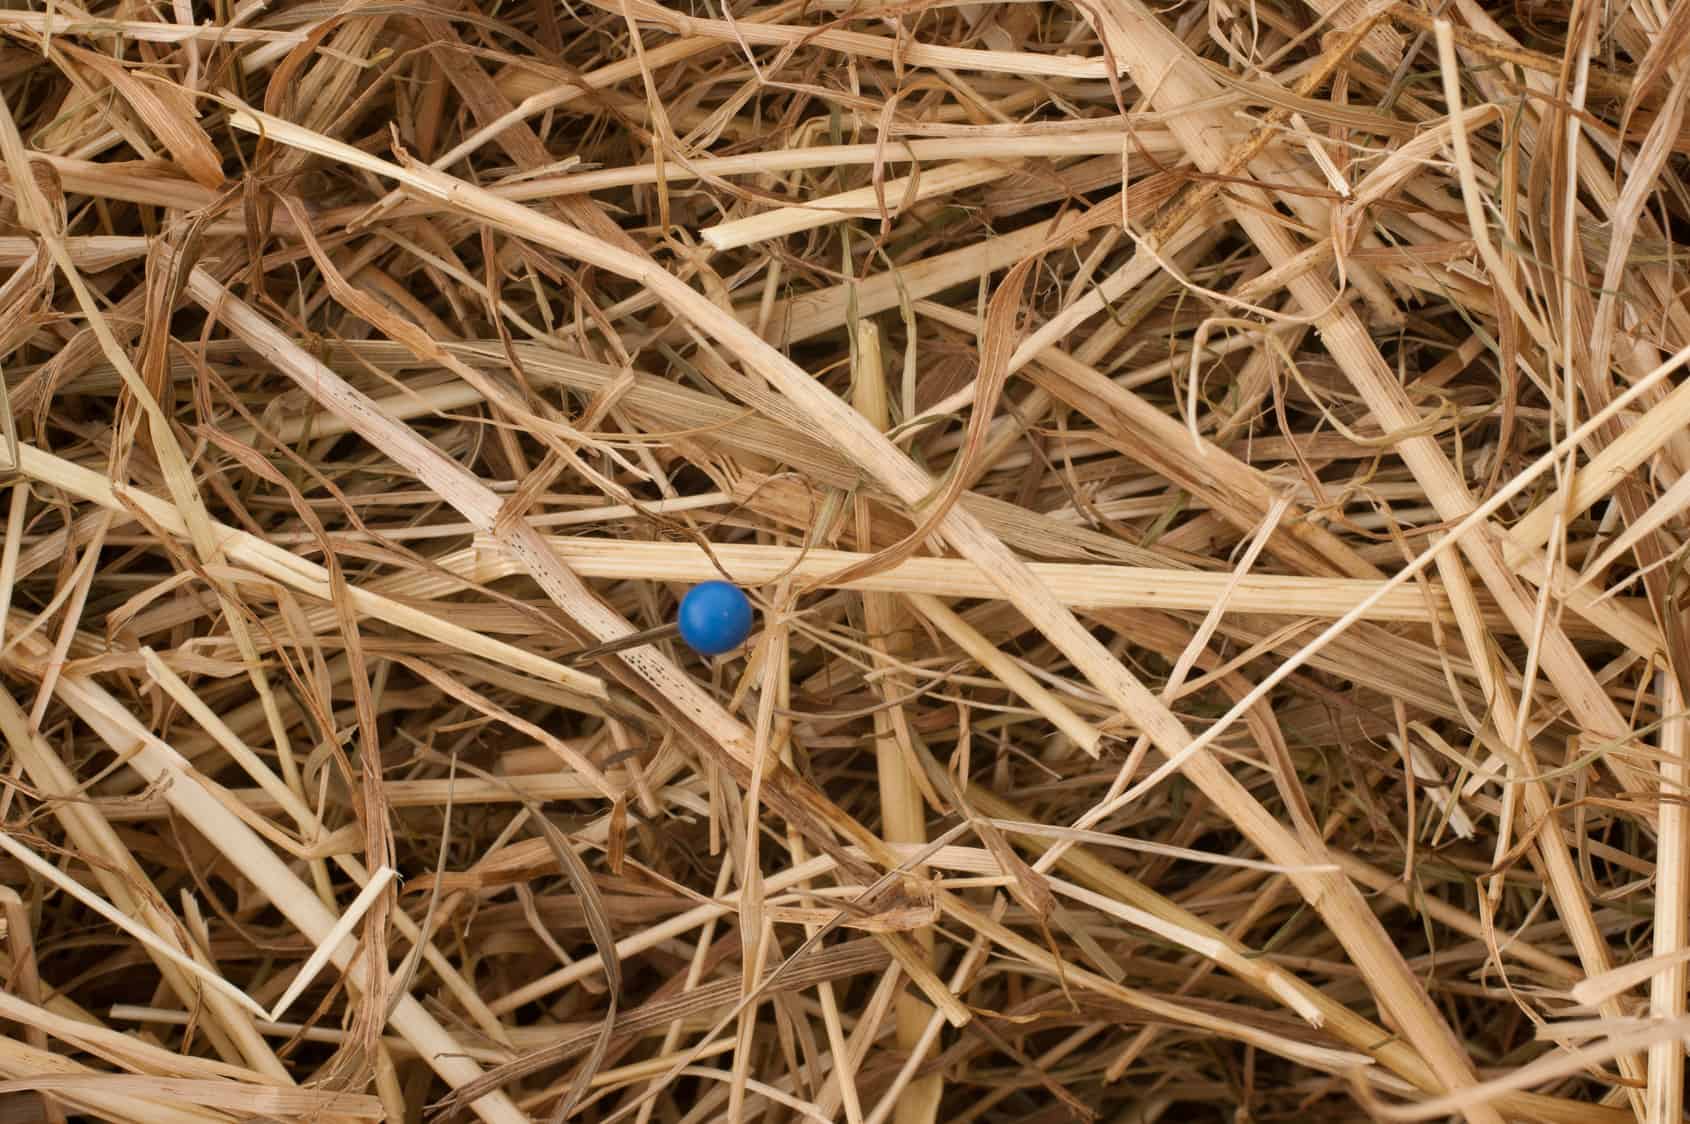 A needle with a blue head stuck in a haystack